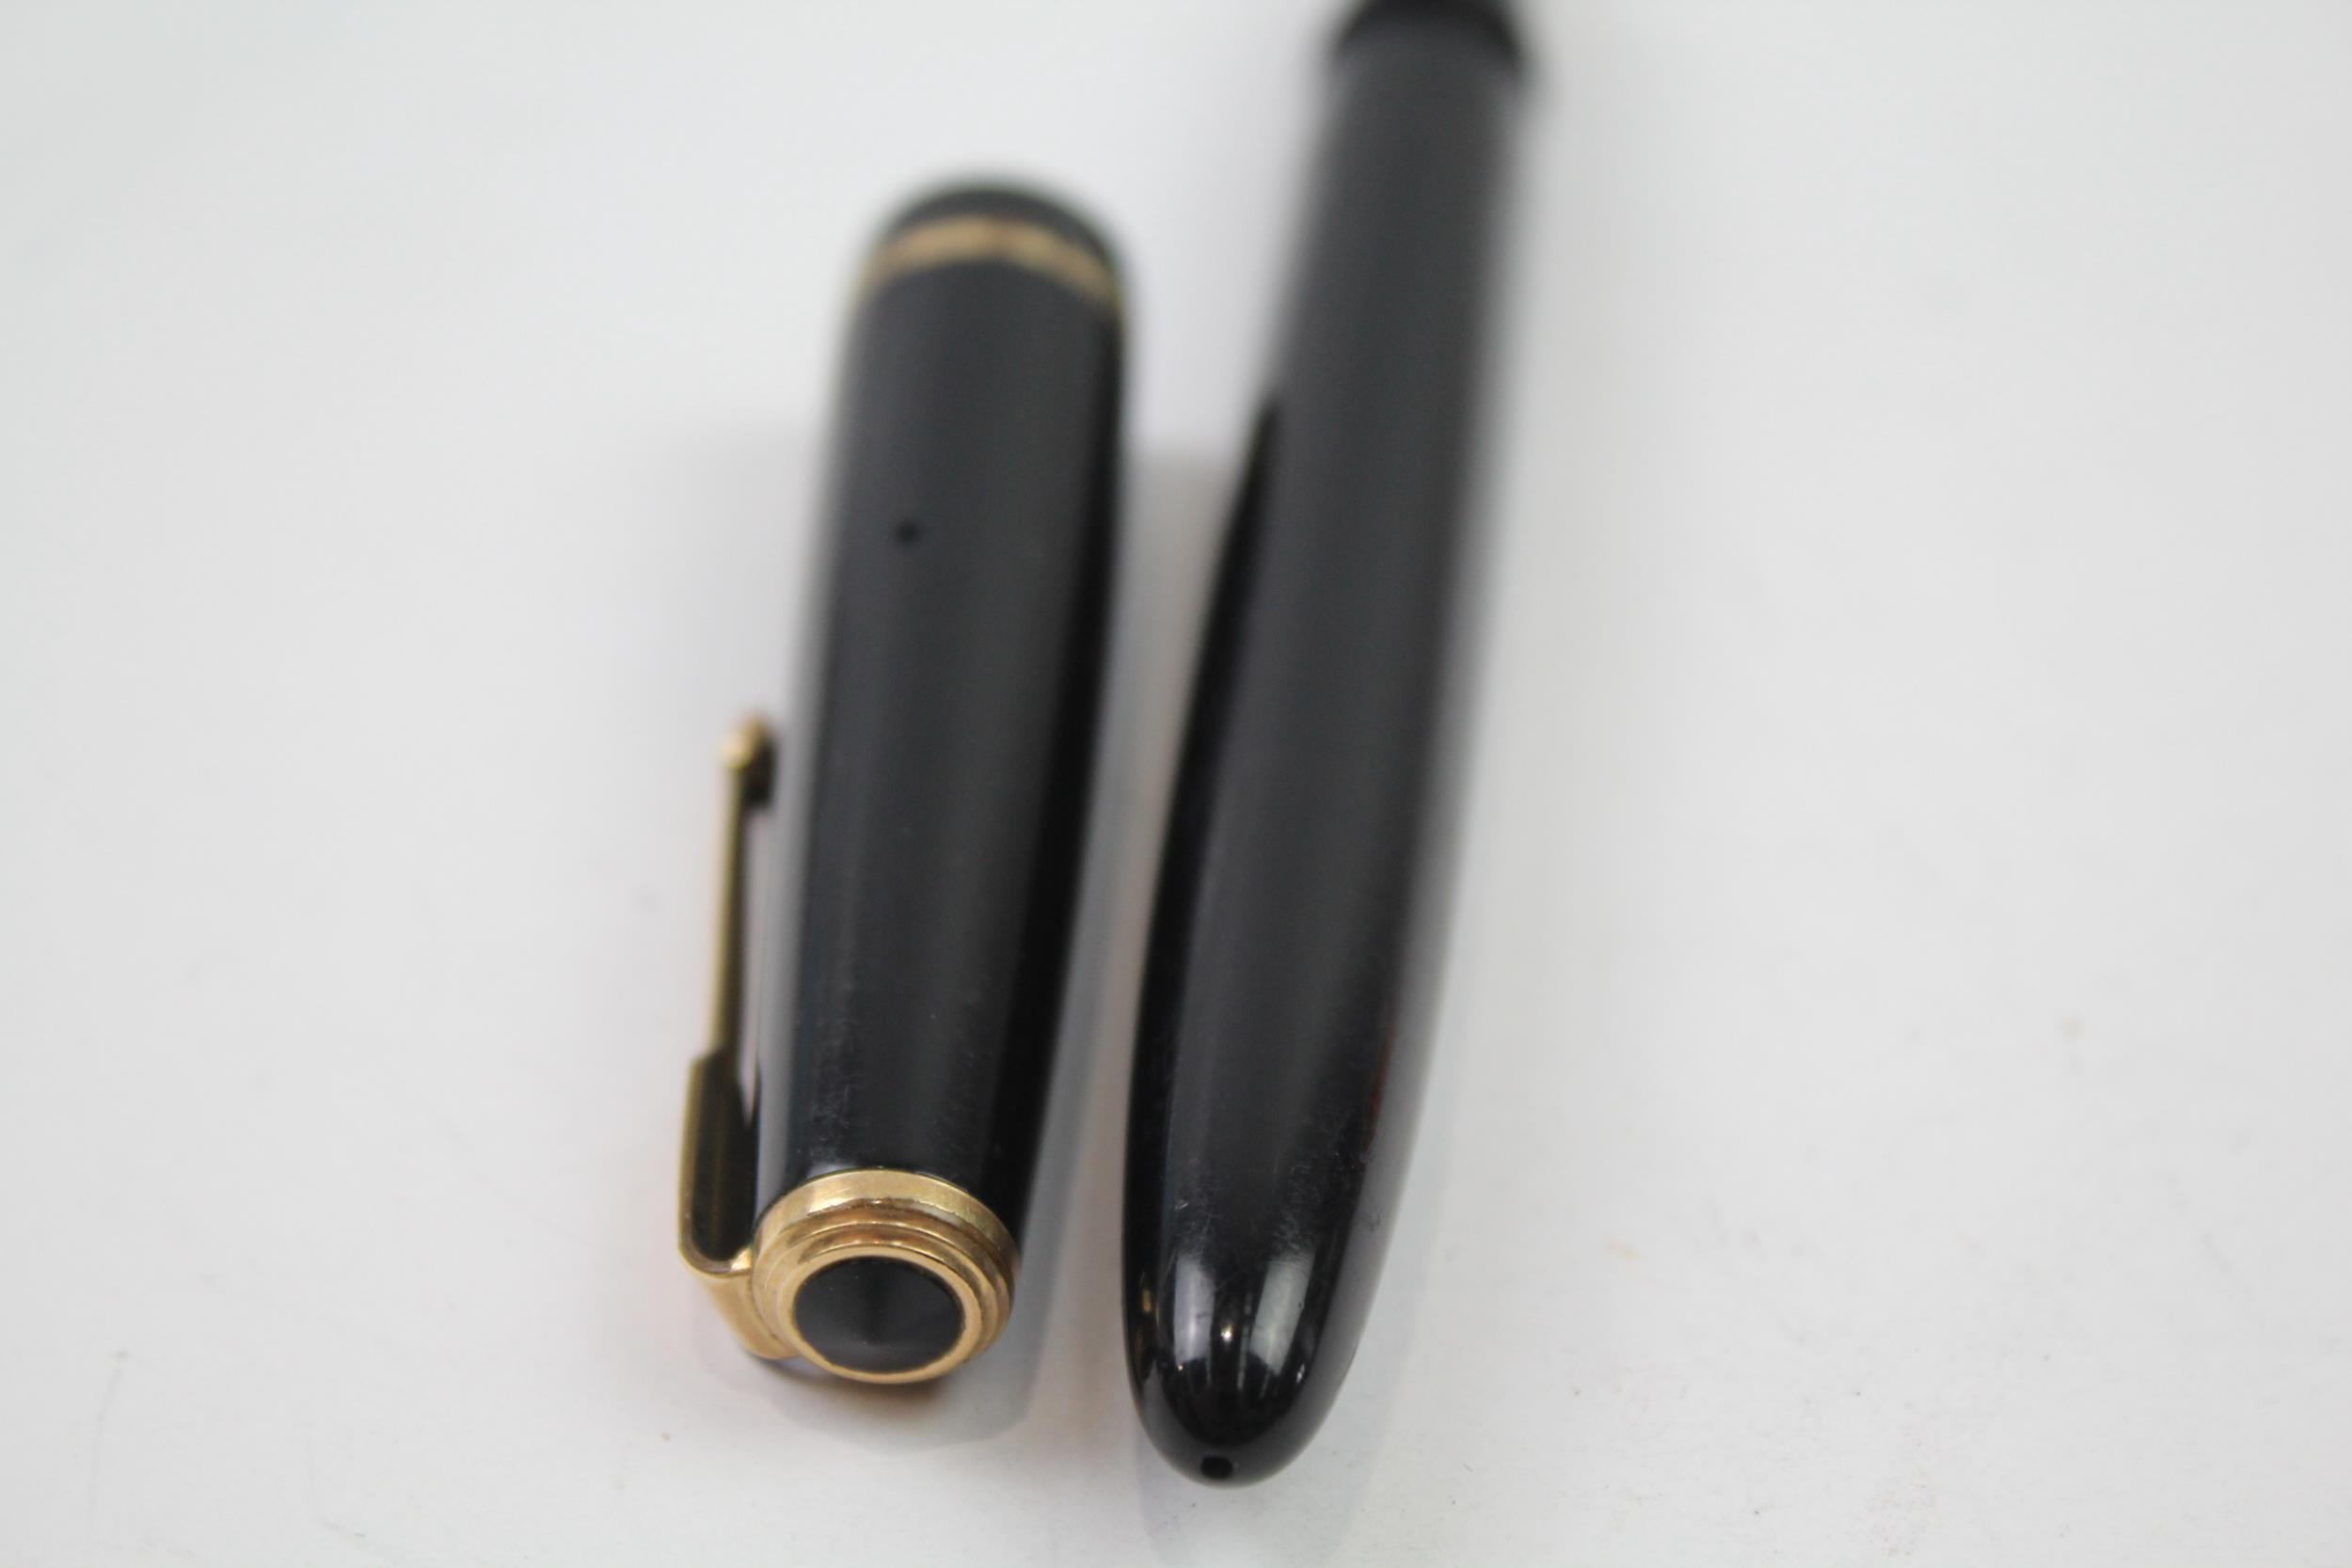 Parker Senior Duofold Fountain Pen Vintage Black 14ct Gold Nib Writing // Dip Tested & WRITING In - Image 7 of 8